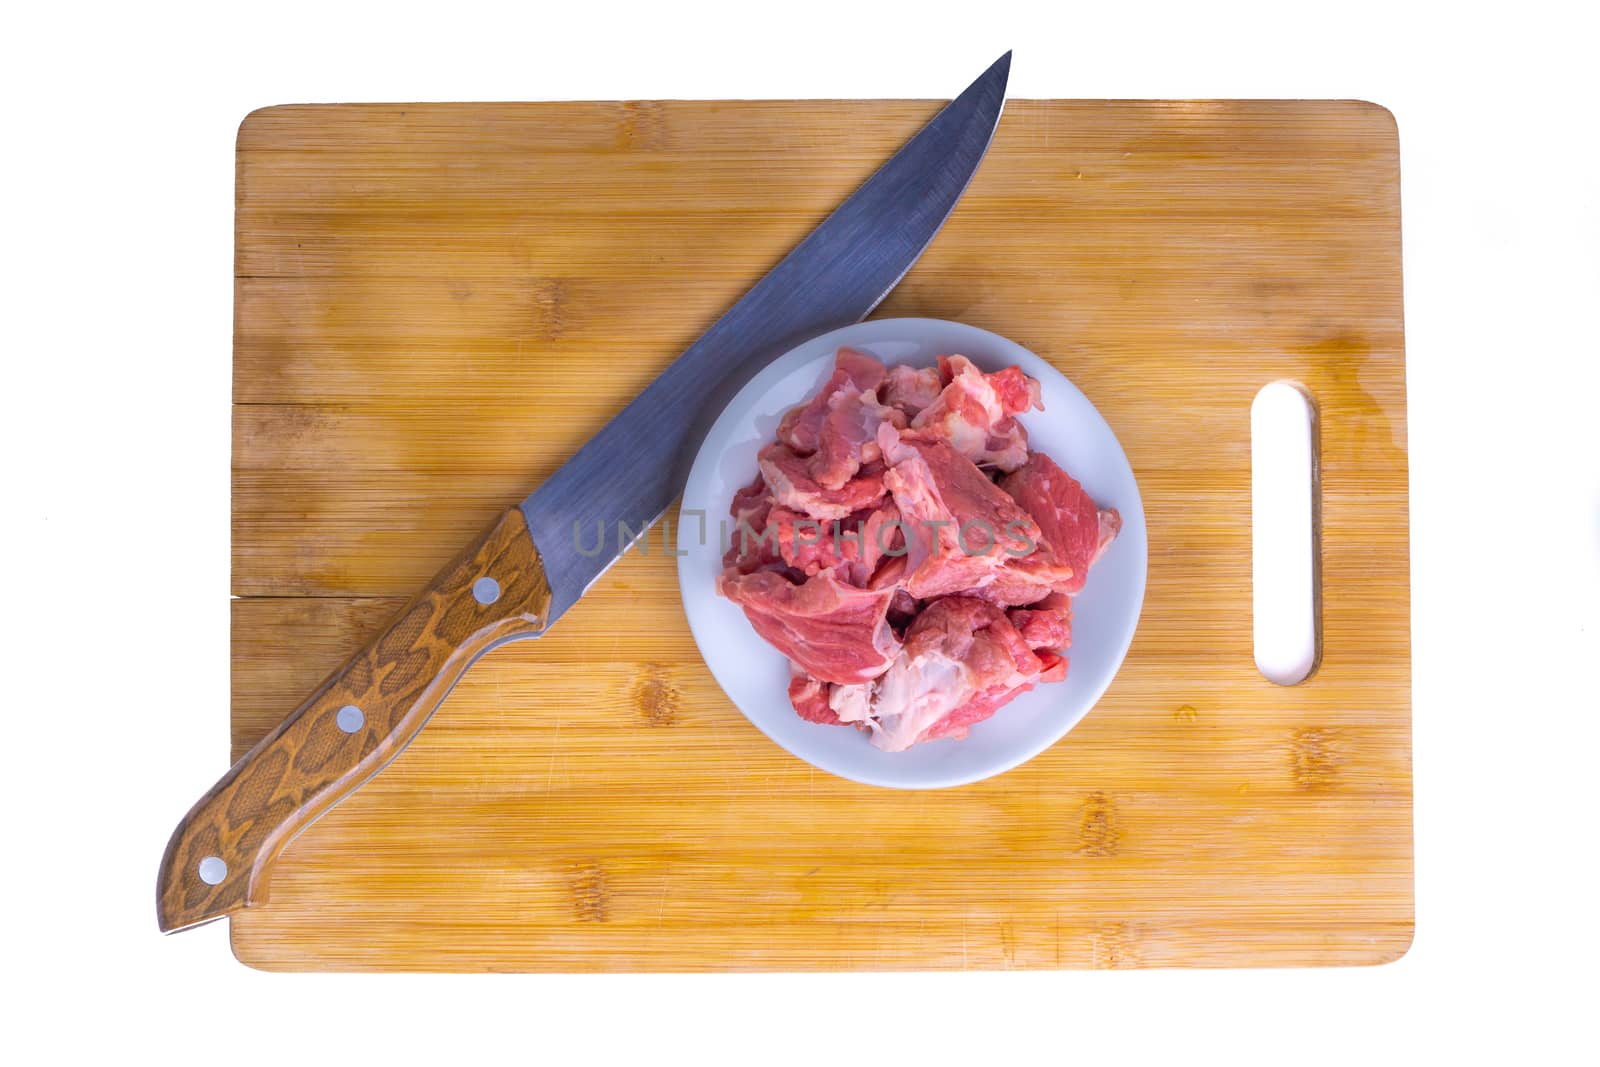 Fresh raw beef steak on wooden background with selective focus by silverwings